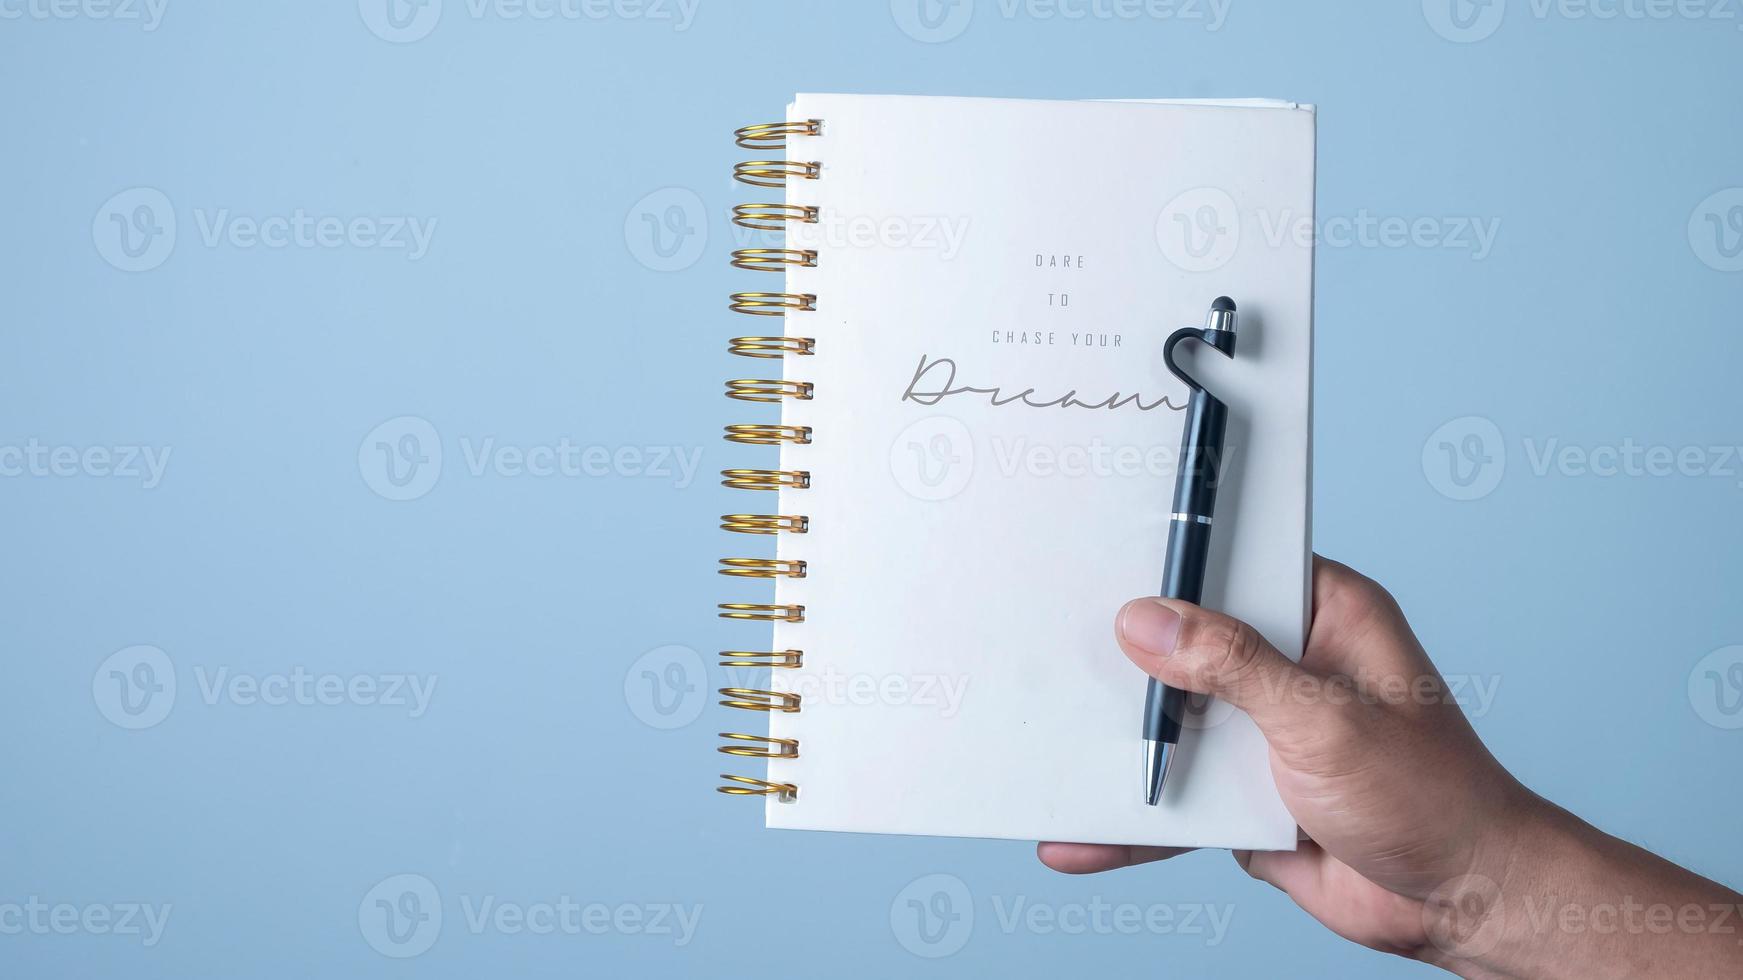 Hand holding a pen and note book on blue background, business concept photo